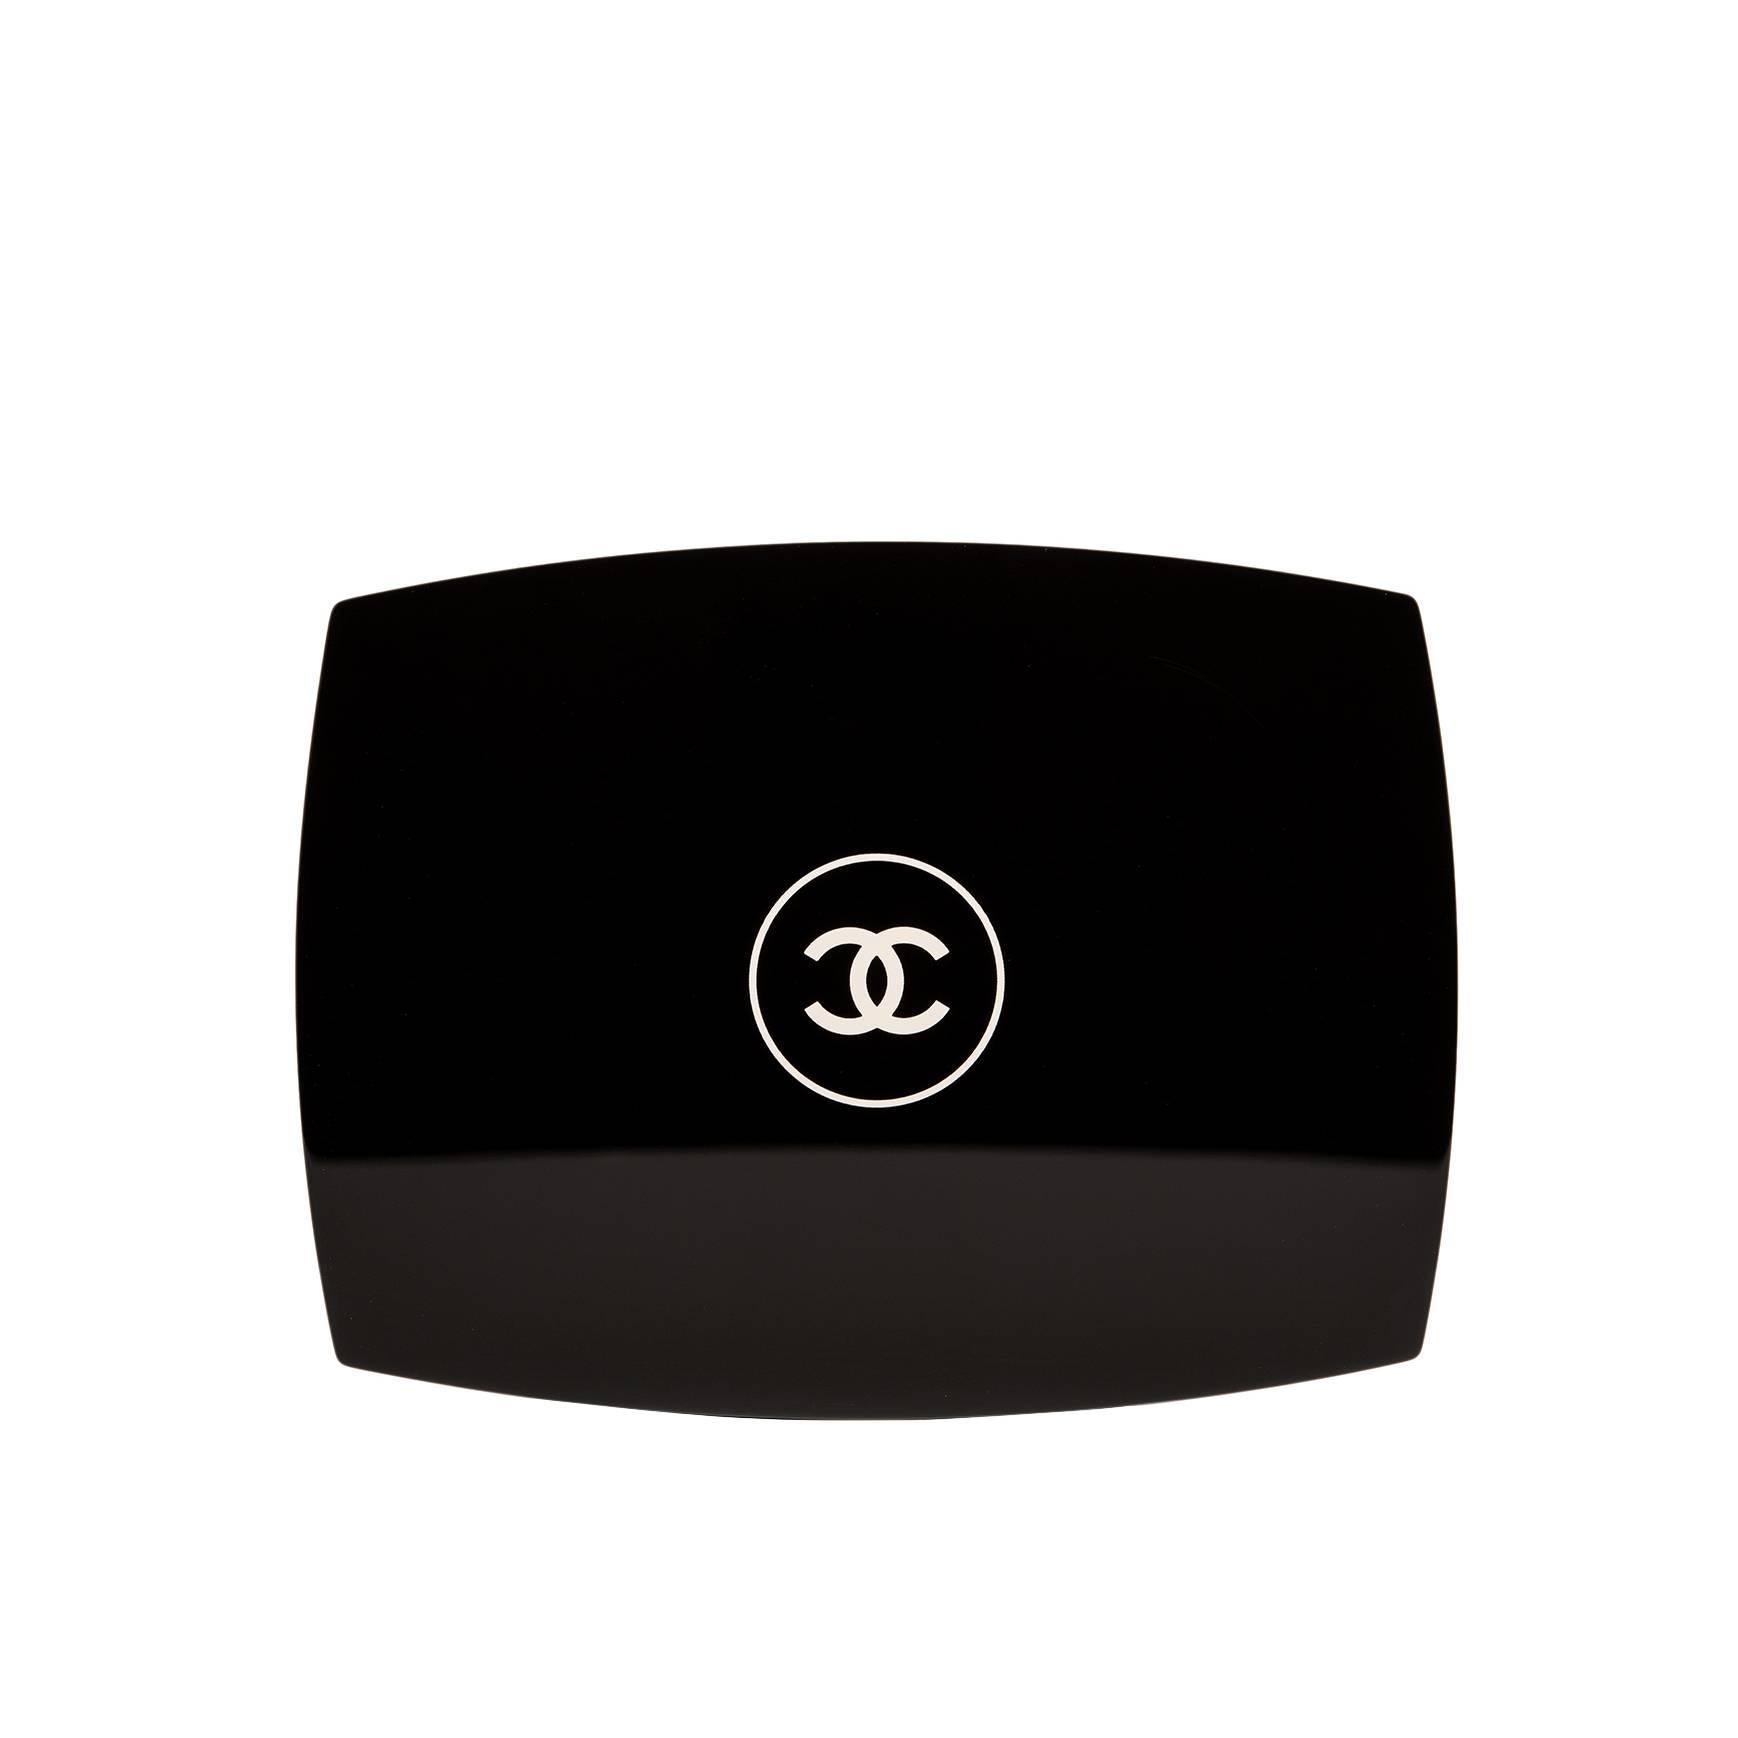 Chanel Limited Edition Black Compact Powder Minaudiere NEW For Sale